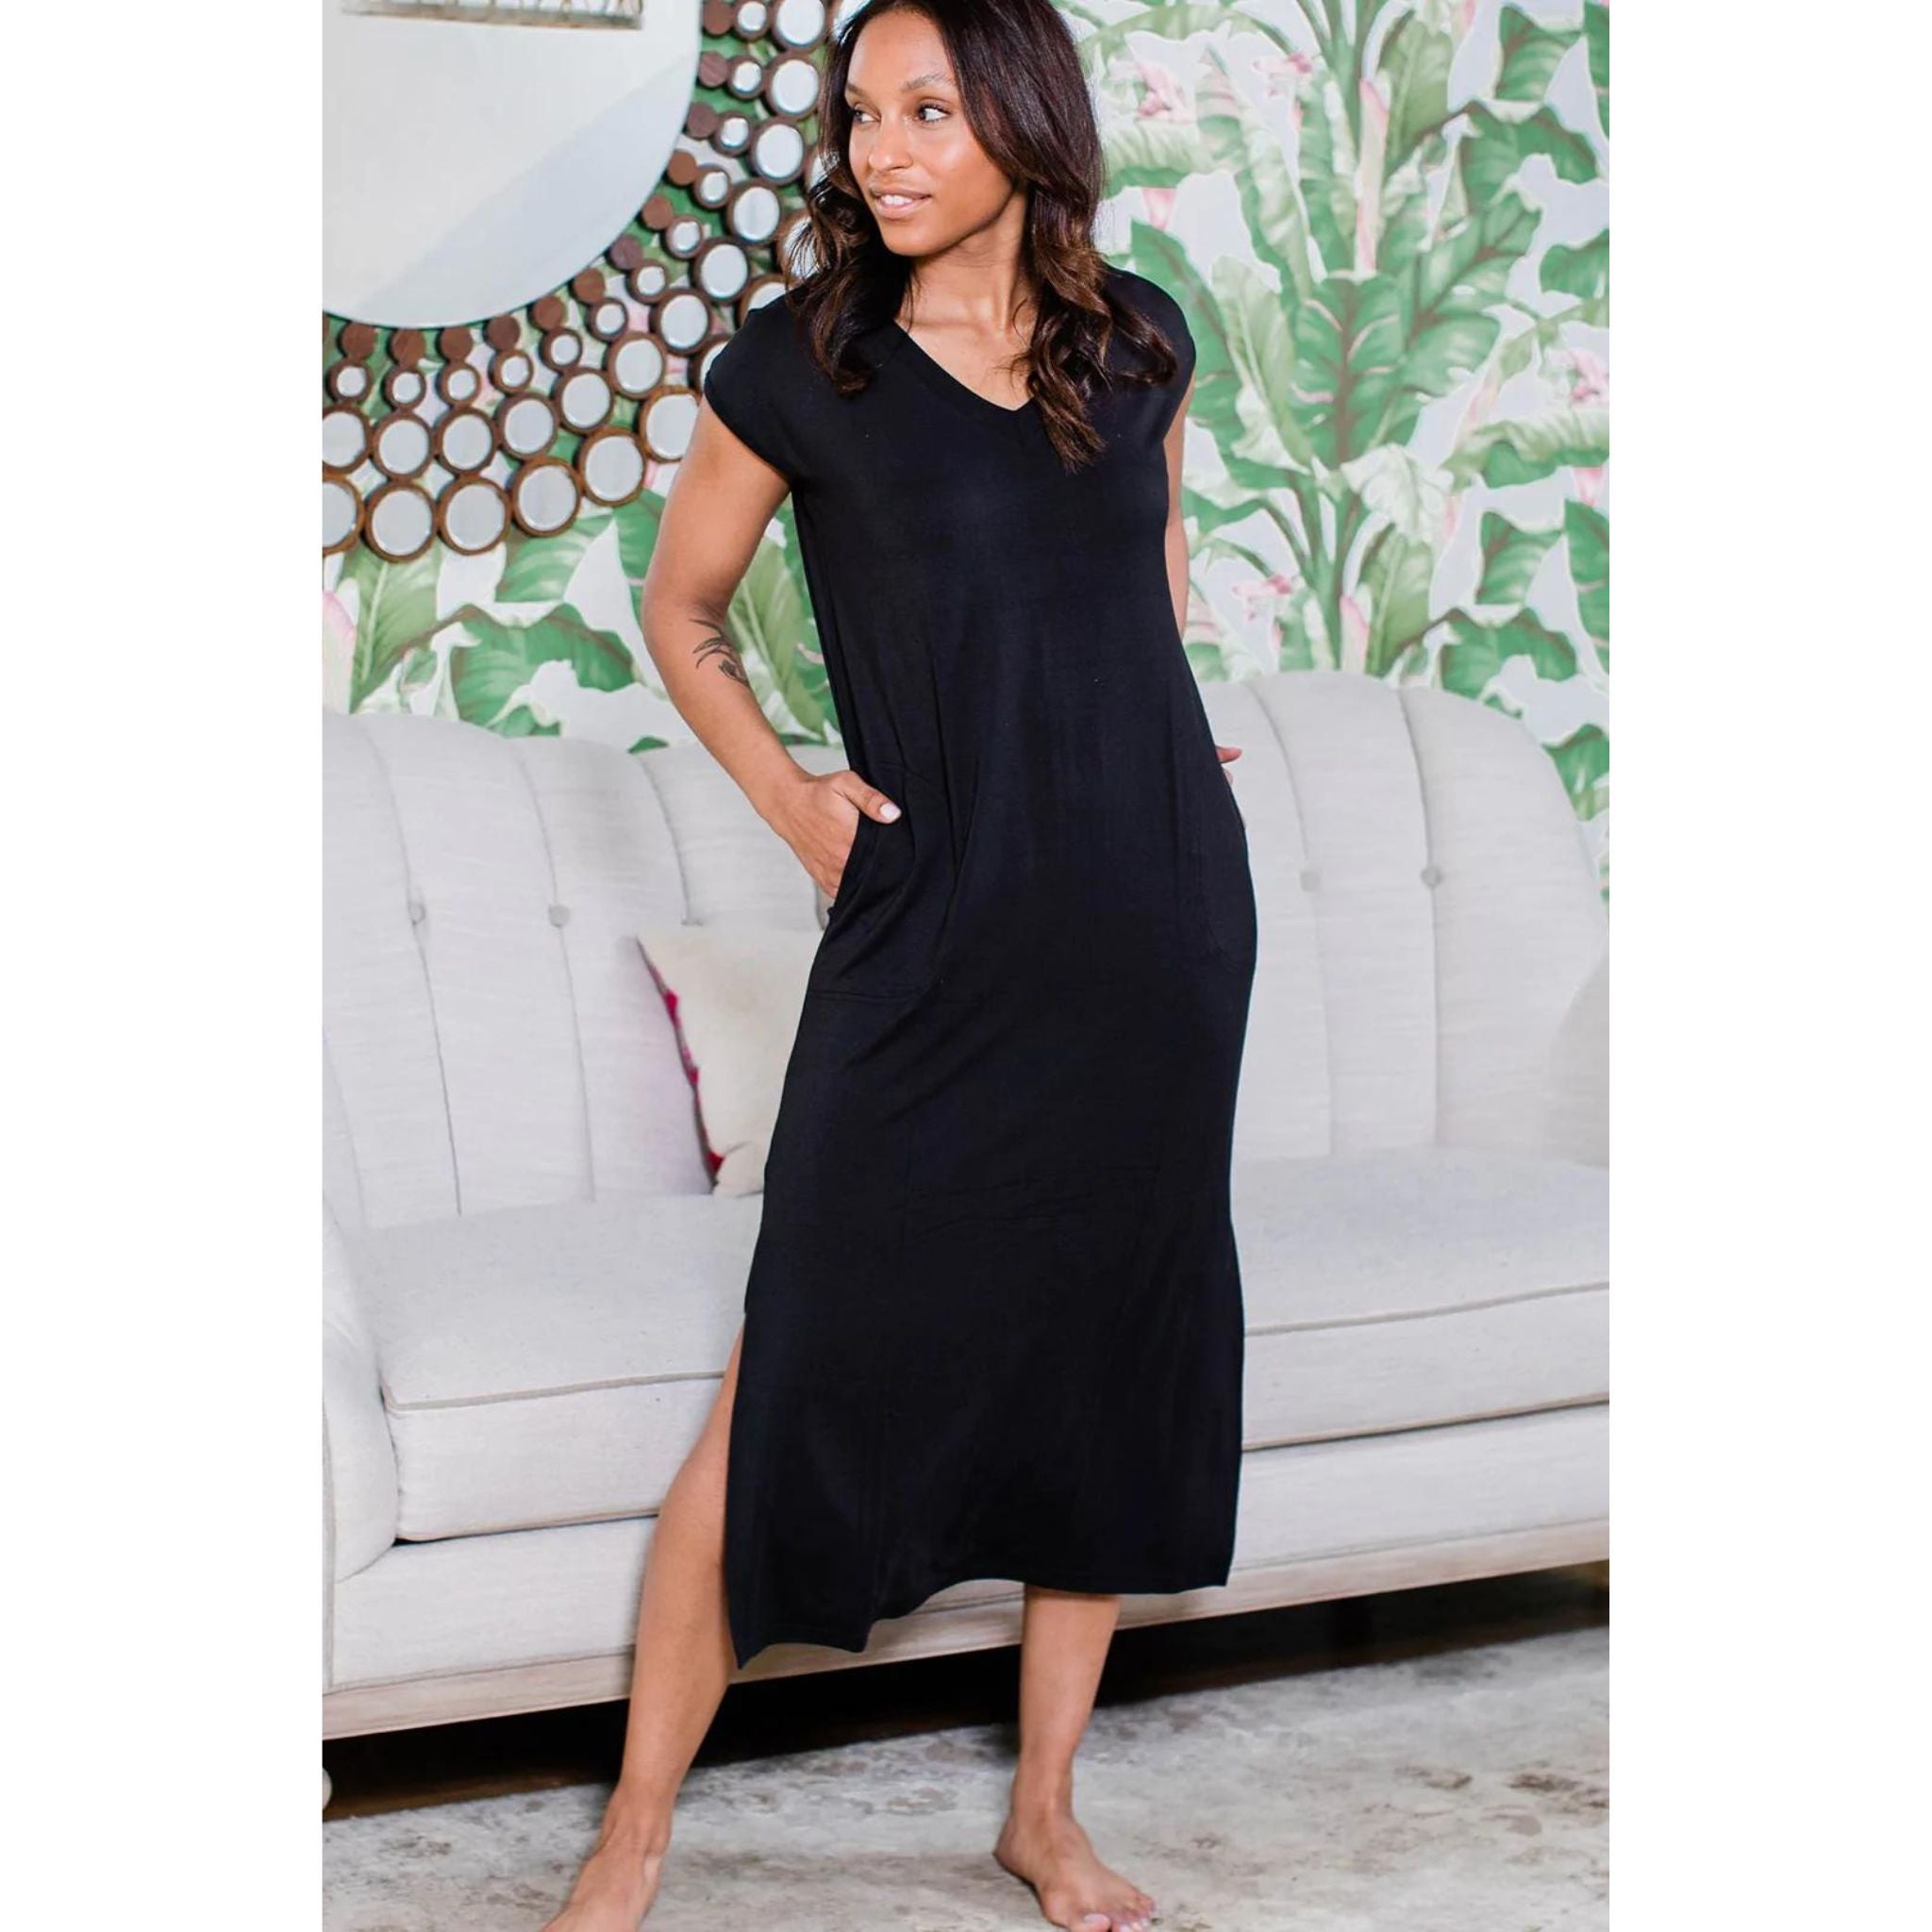 When casual chic comfort calls, the Sloan V-Neck Cap Sleep Bamboo Maxi Dress answers. This loose-fitting t-shirt dress is more flattering than one might expect for its simplicity, or maybe that's the extra radiance you exude from being so wonderfully uninhibited. Chaise lounge optional, but highly recommended. Loose fit, cap sleeve, pockets at hip, V-neck, hem lands at mid-calf.